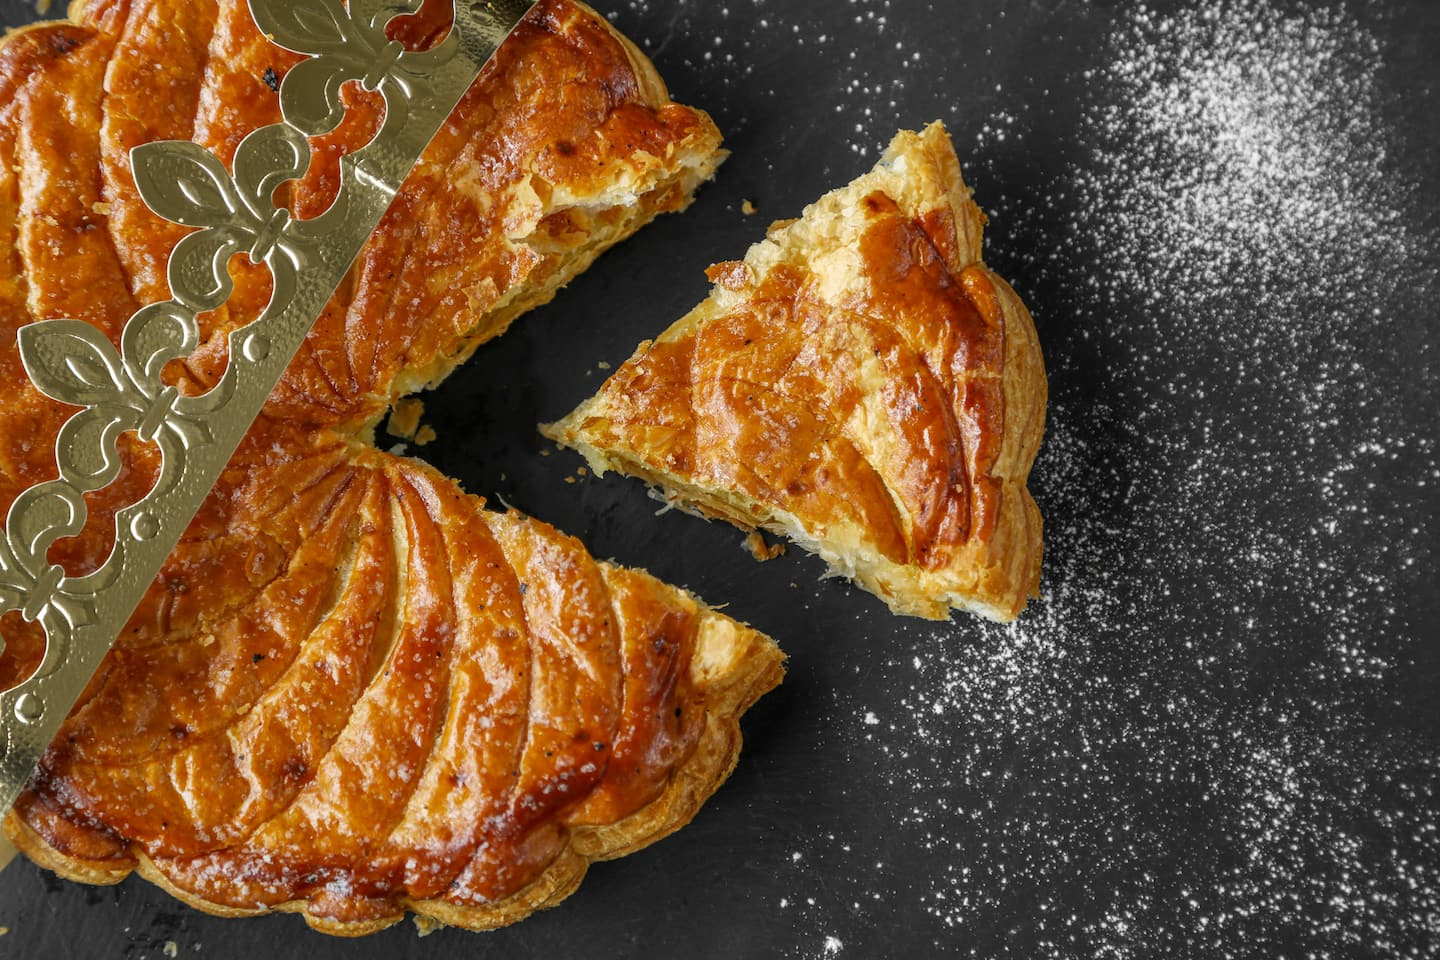 The recipes of our ancestors: here is the real story of the galette (or cake) of the Kings